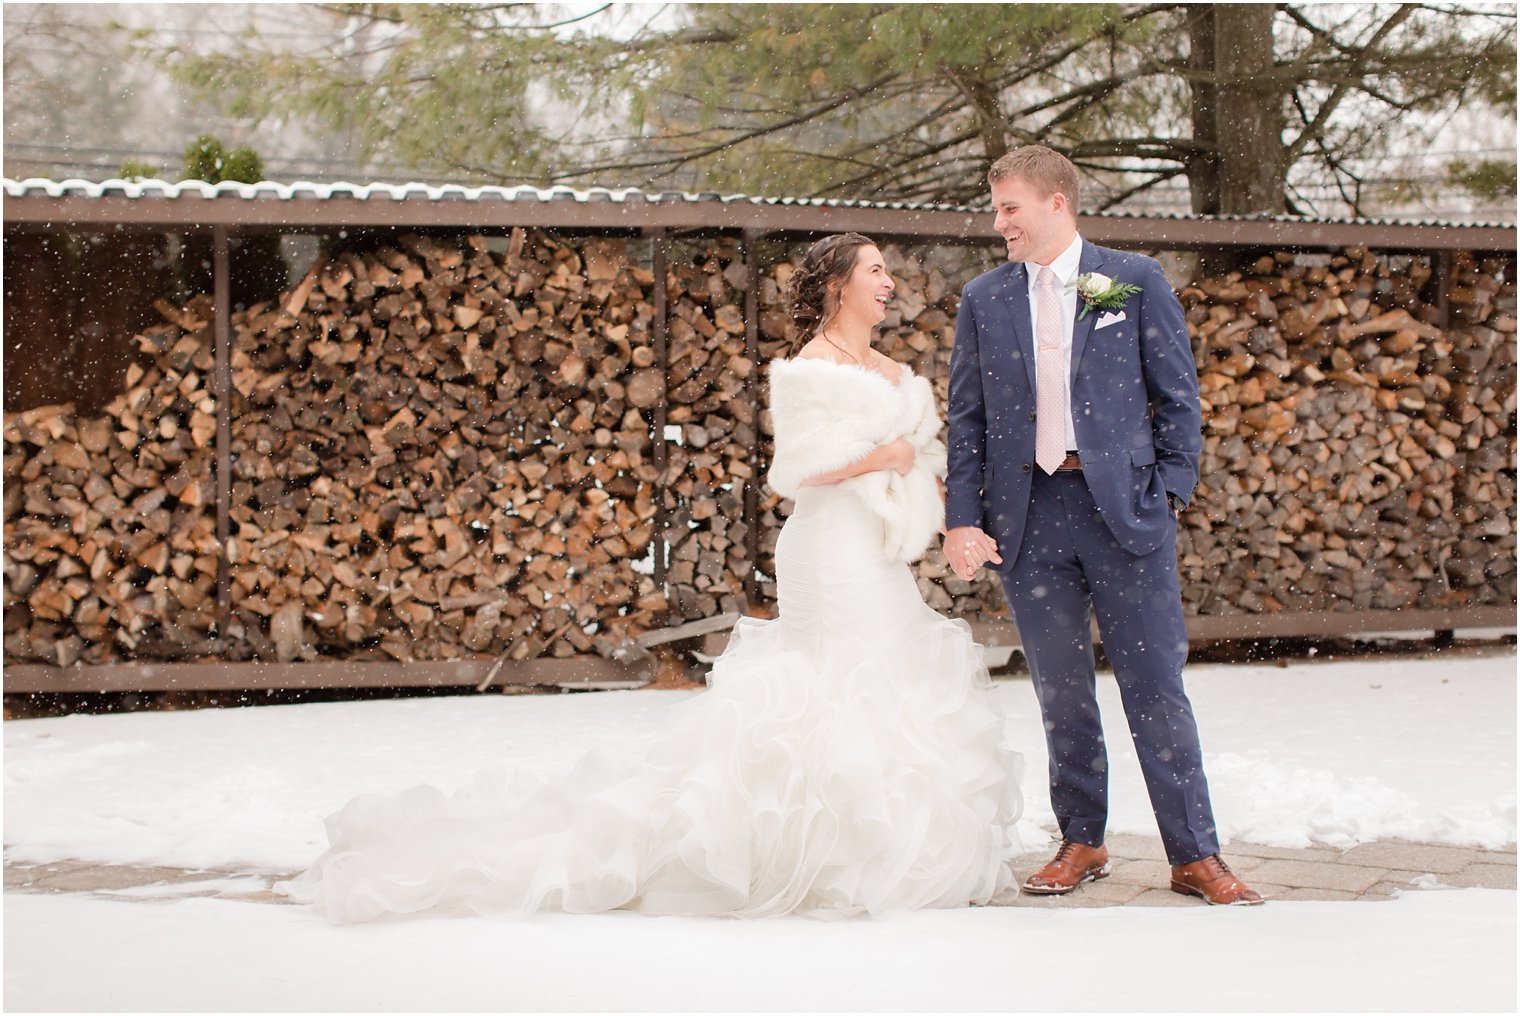 Laughing photo of bride and groom | Stone House at Stirling Ridge in Warren, NJ